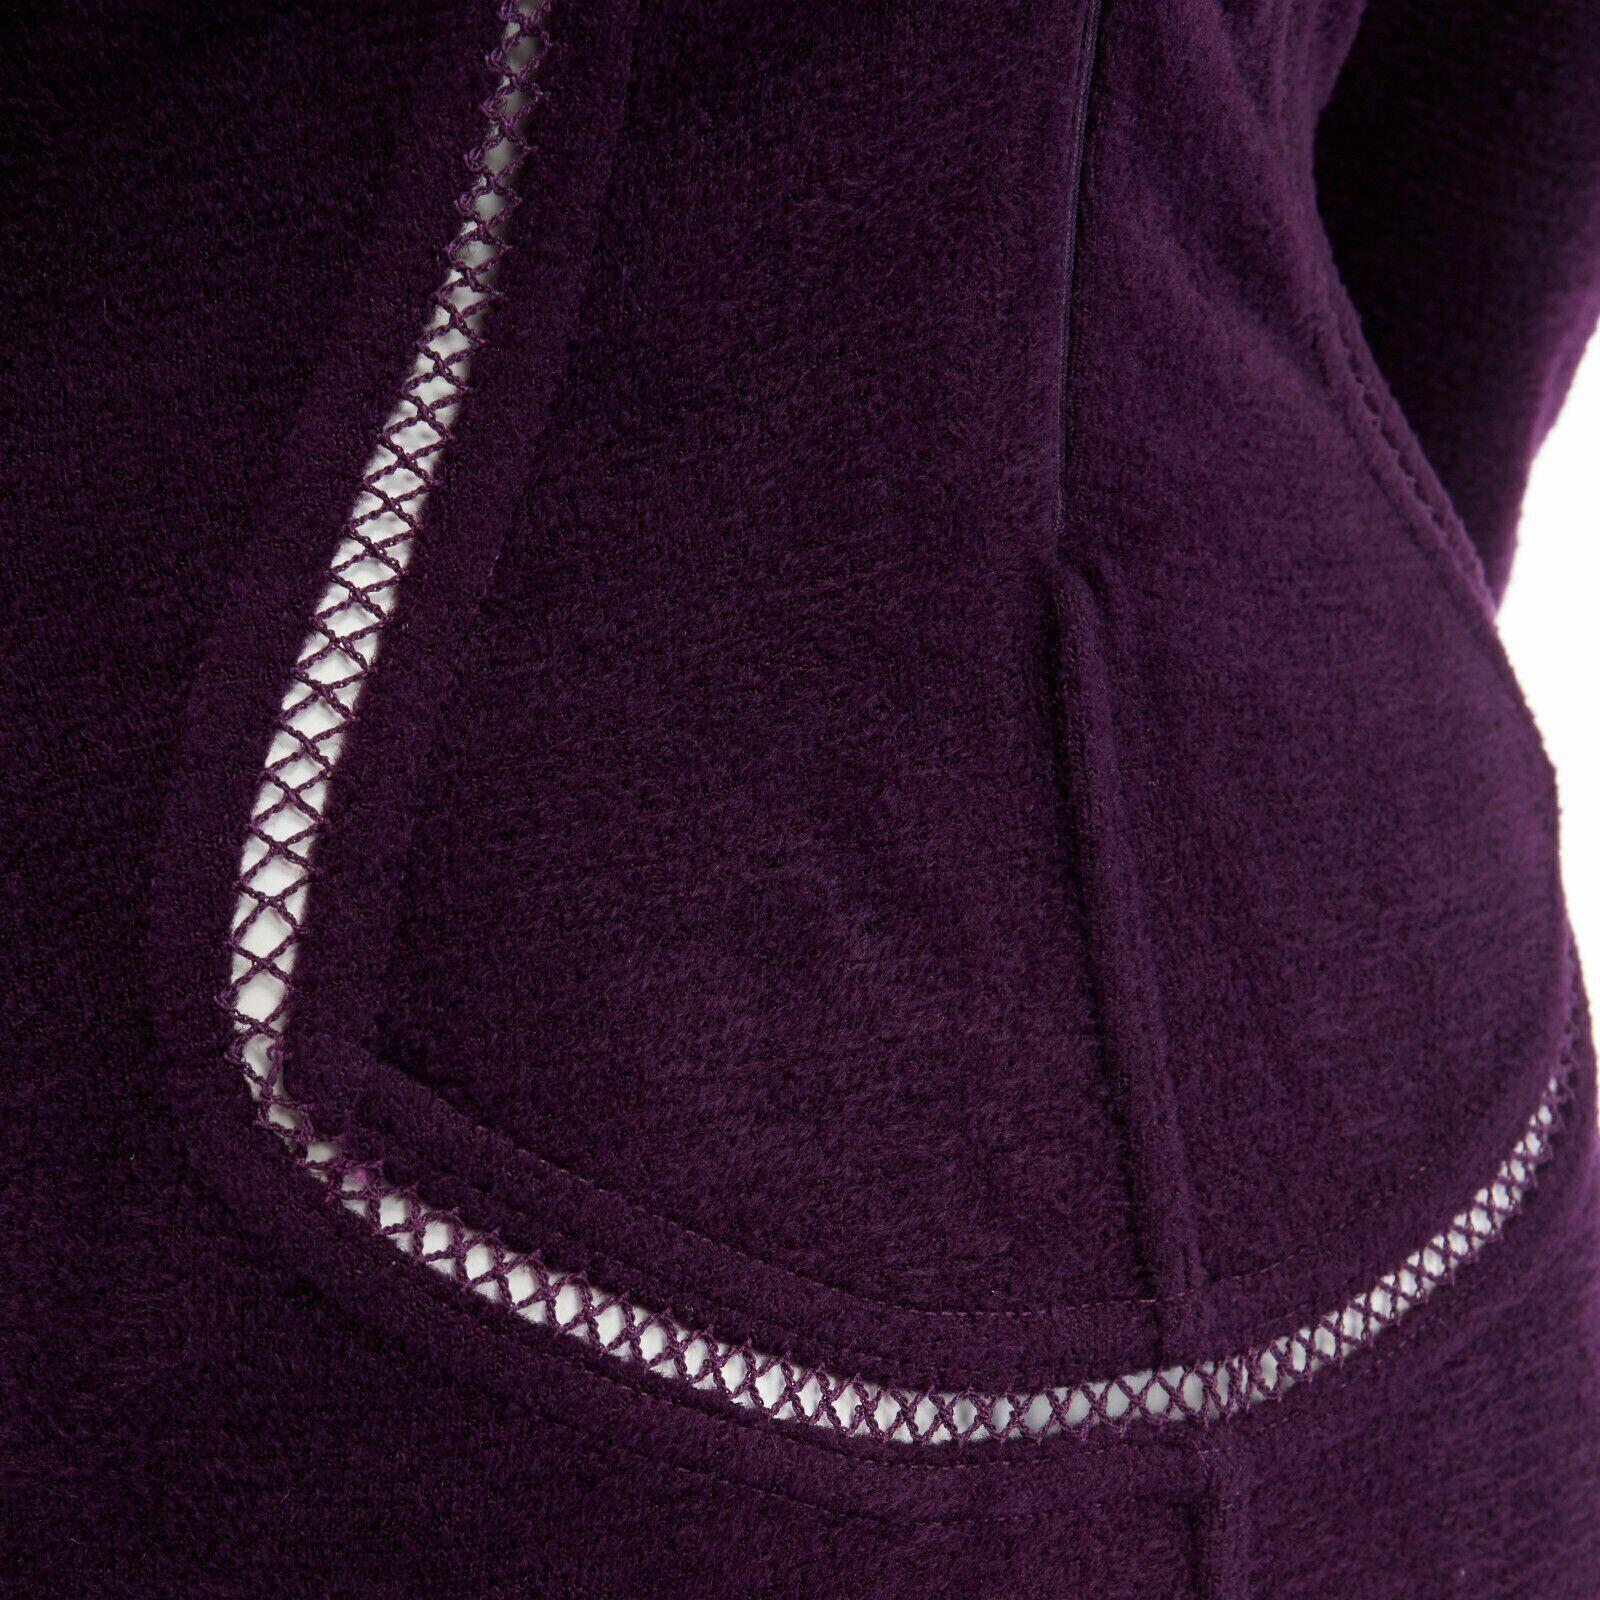 vintage ALAIA purple chenille ladder seams bodycon stretch dress XS US2 UK8
Reference: TGAS/A00817
Brand: Alaia
Designer: Azzedine Alaia
Material: Viscose
Color: Purple
Pattern: Solid
Closure: Zip
Extra Details: Purple chenille. Ladder stitch body